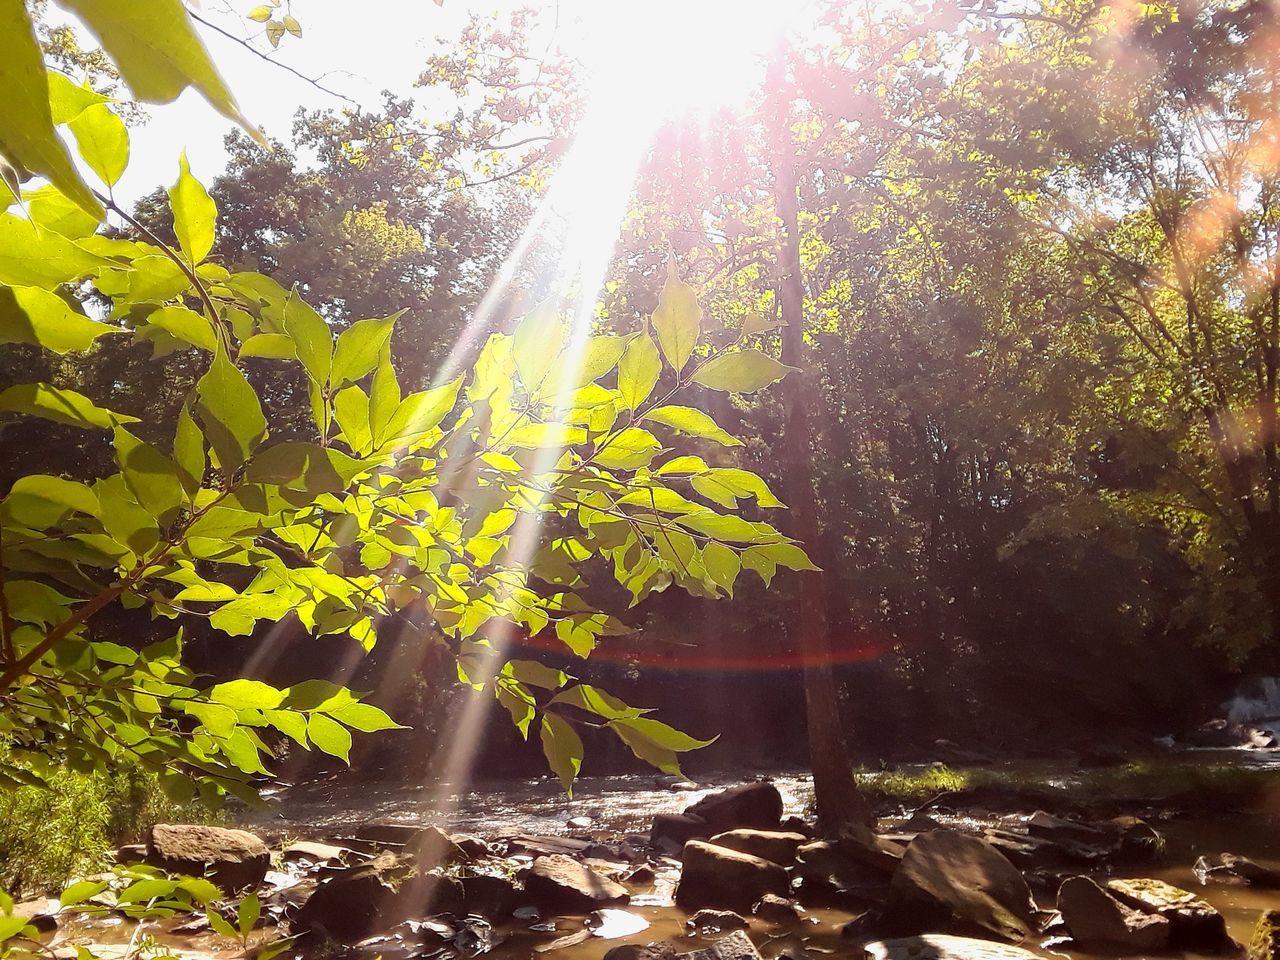 growth, nature, sunbeam, sunlight, lens flare, leaf, sun, tree, bright, beauty in nature, plant, no people, day, outdoors, water, tranquility, freshness, sunshine, fragility